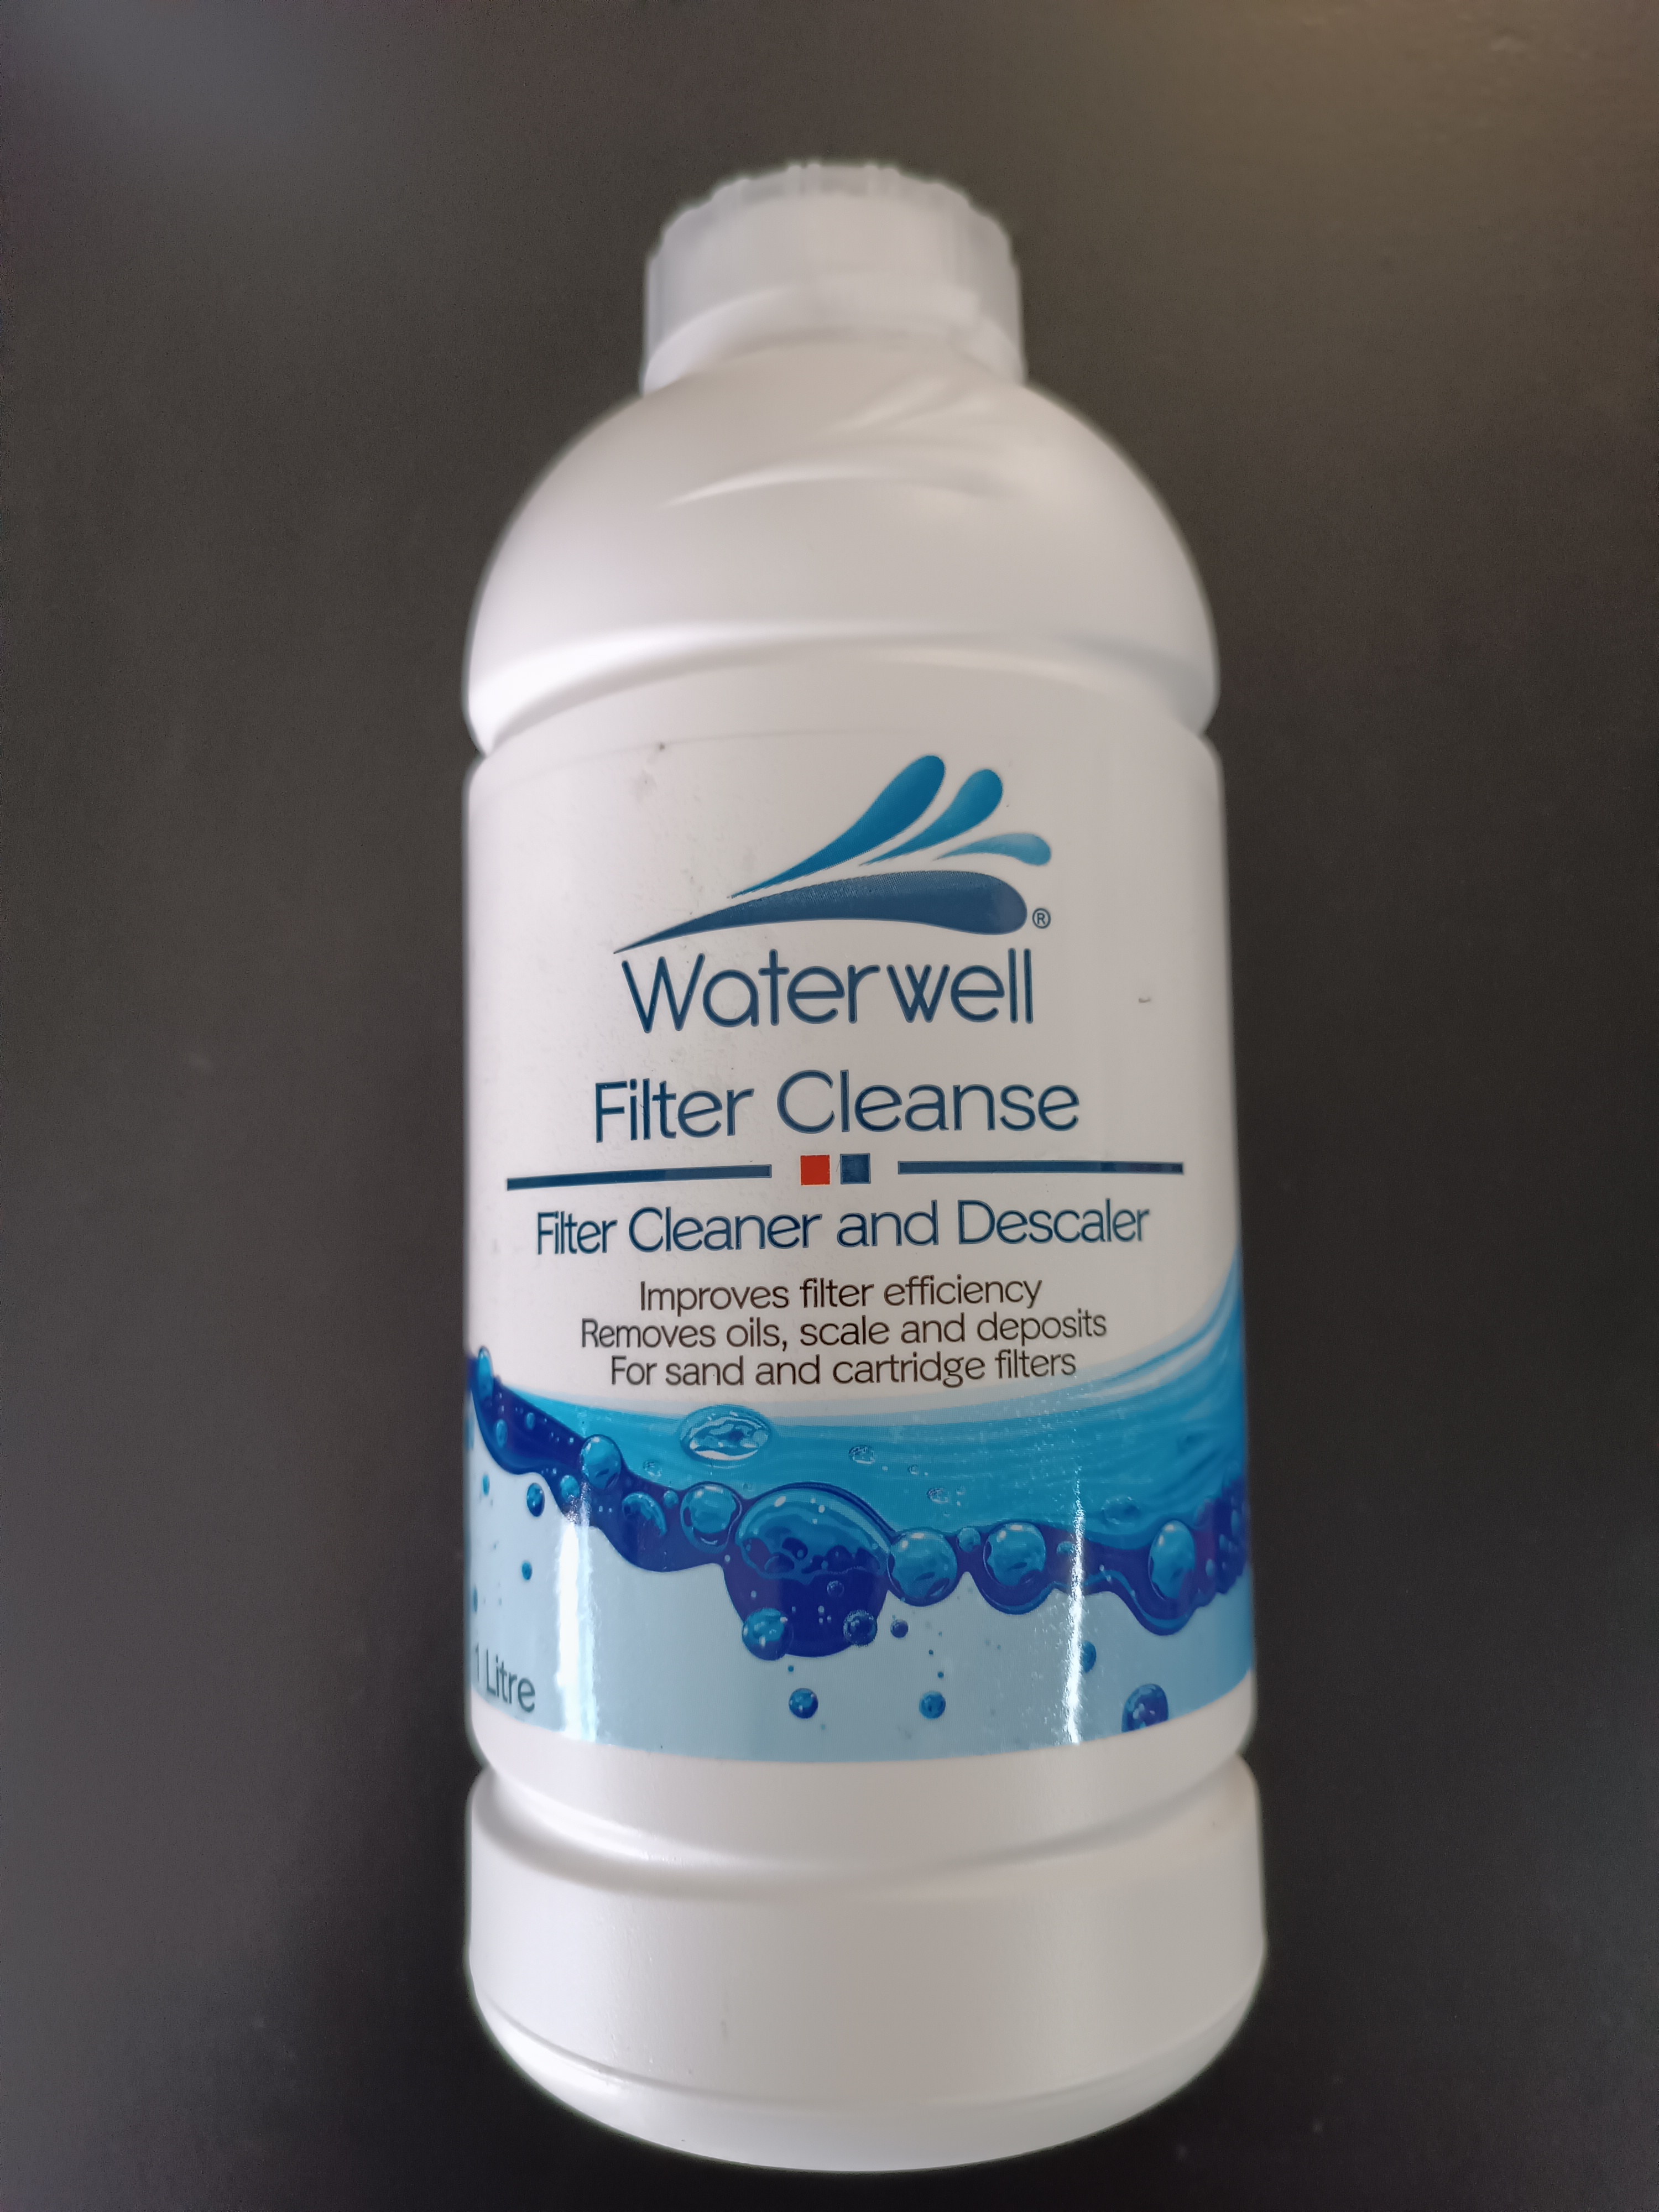 waterwell-filter-cleanse